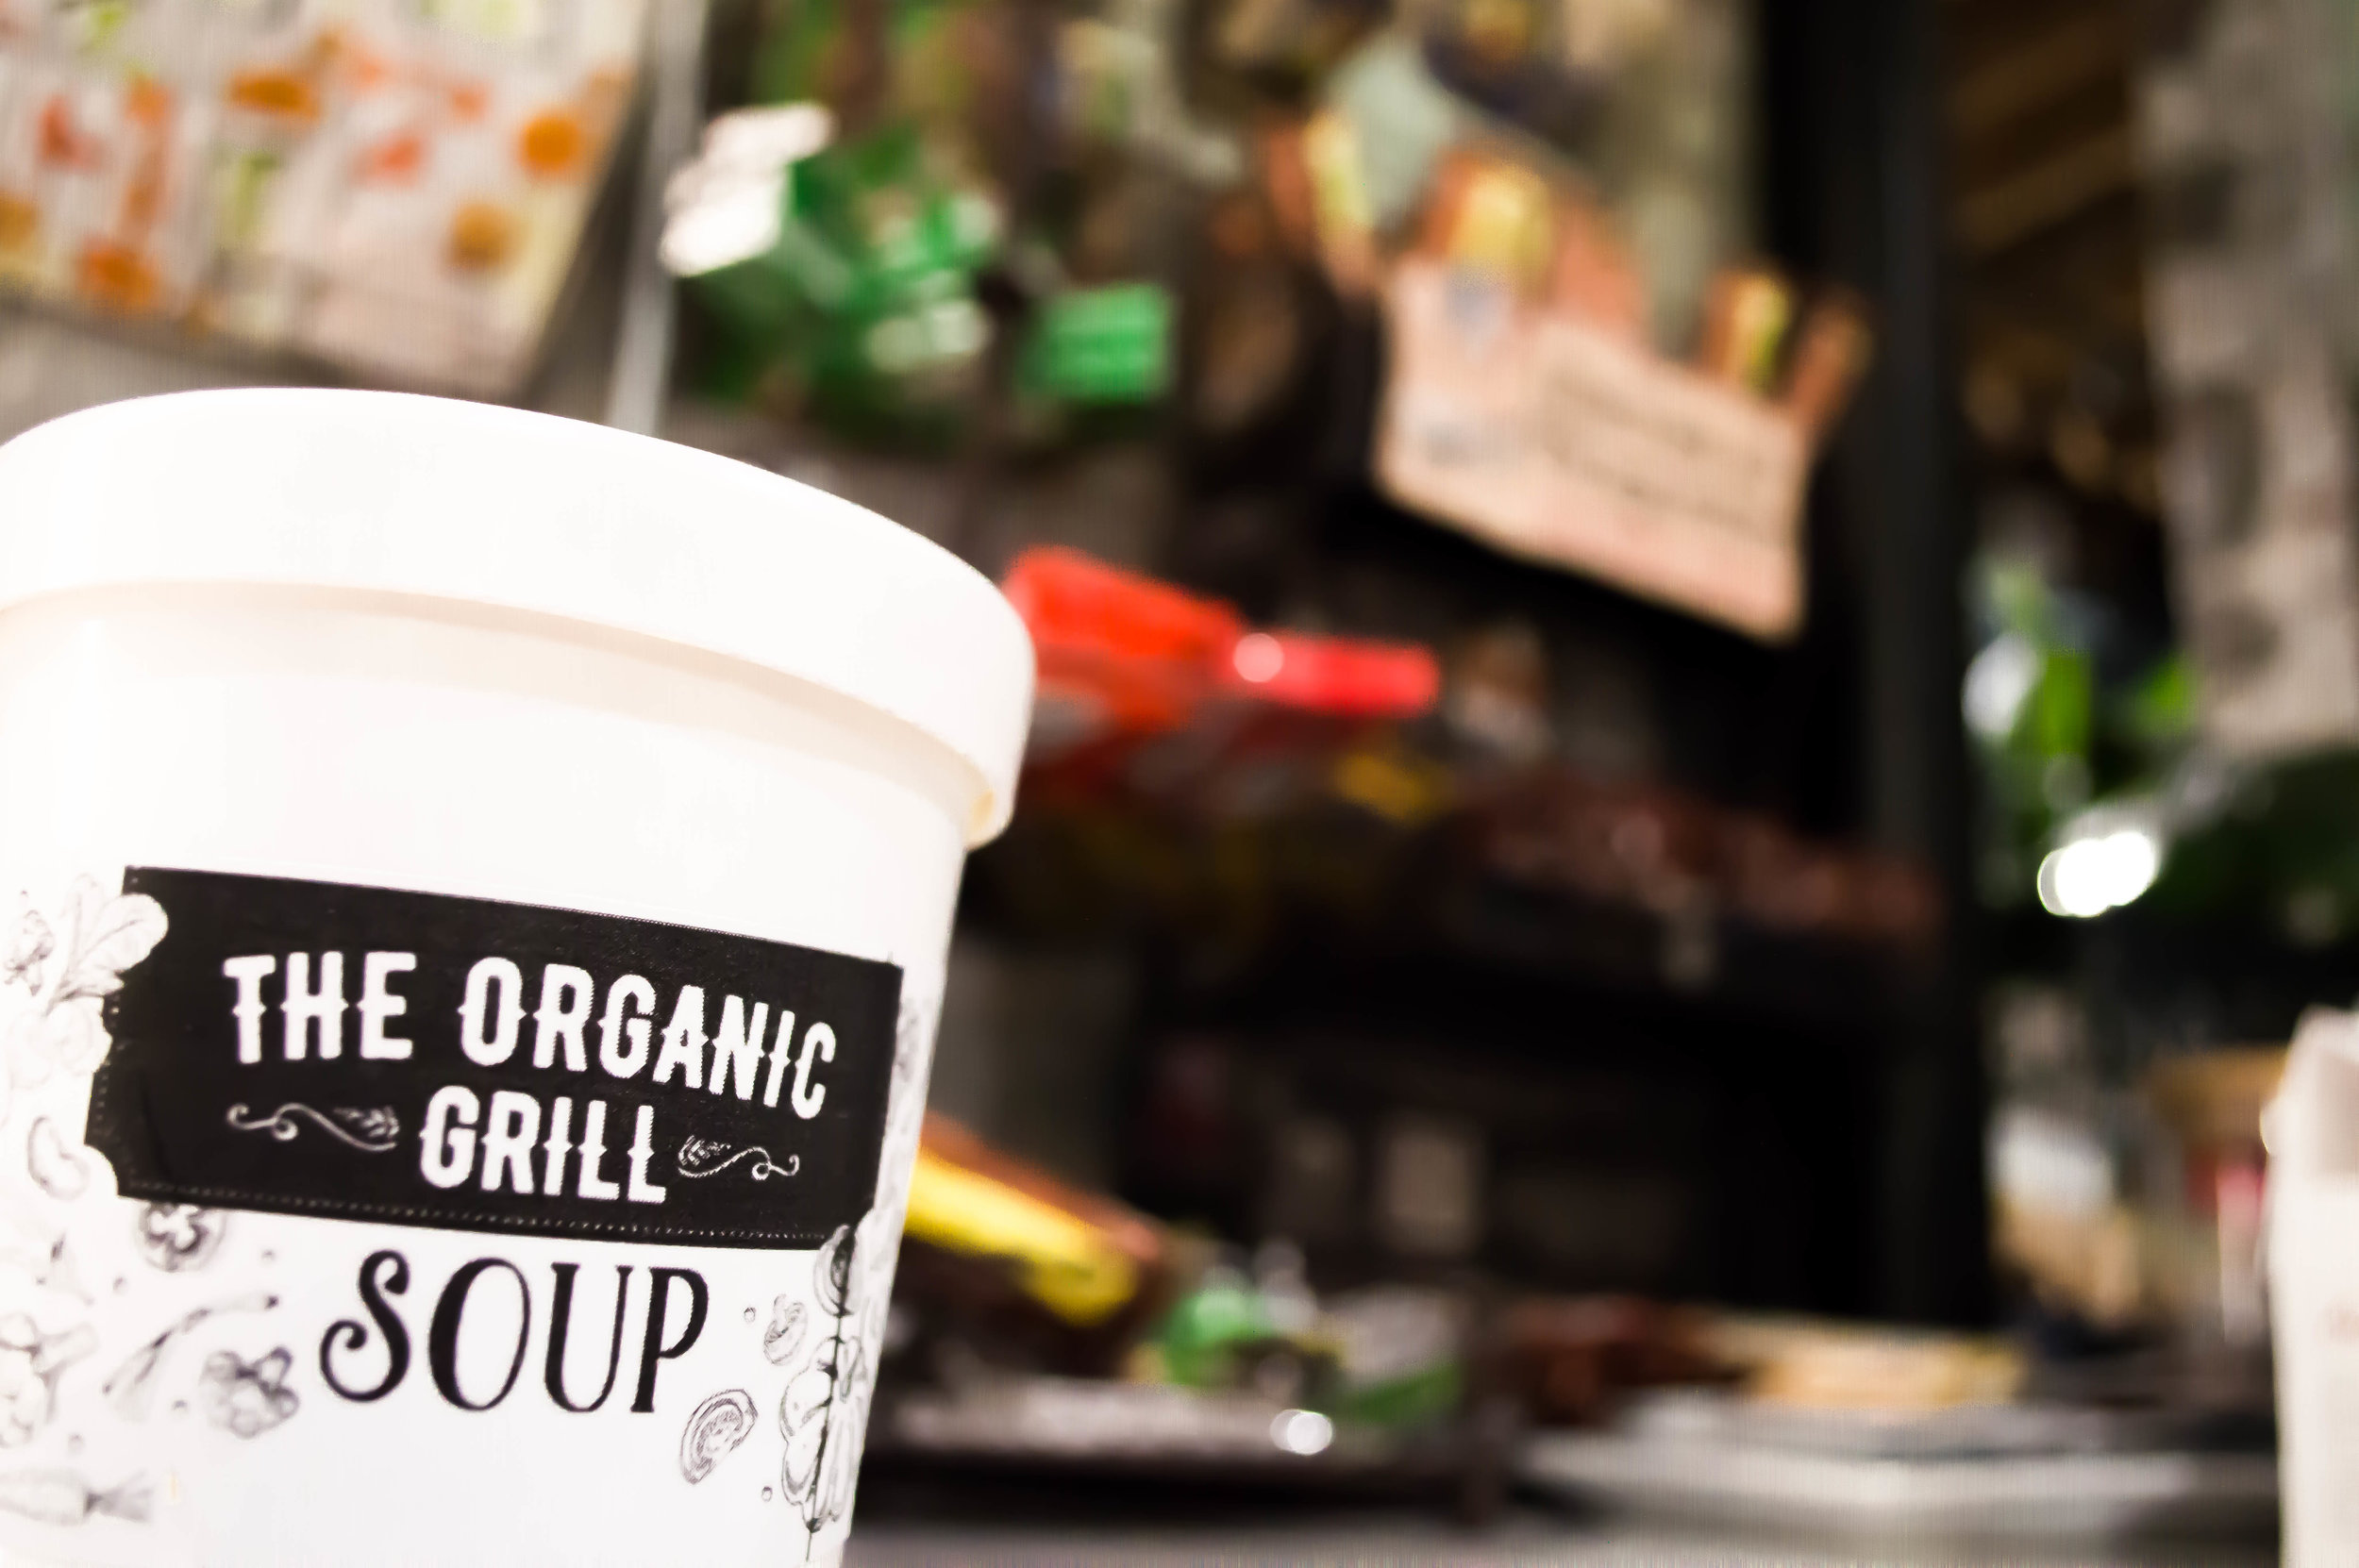 Soup from the Organic Grill